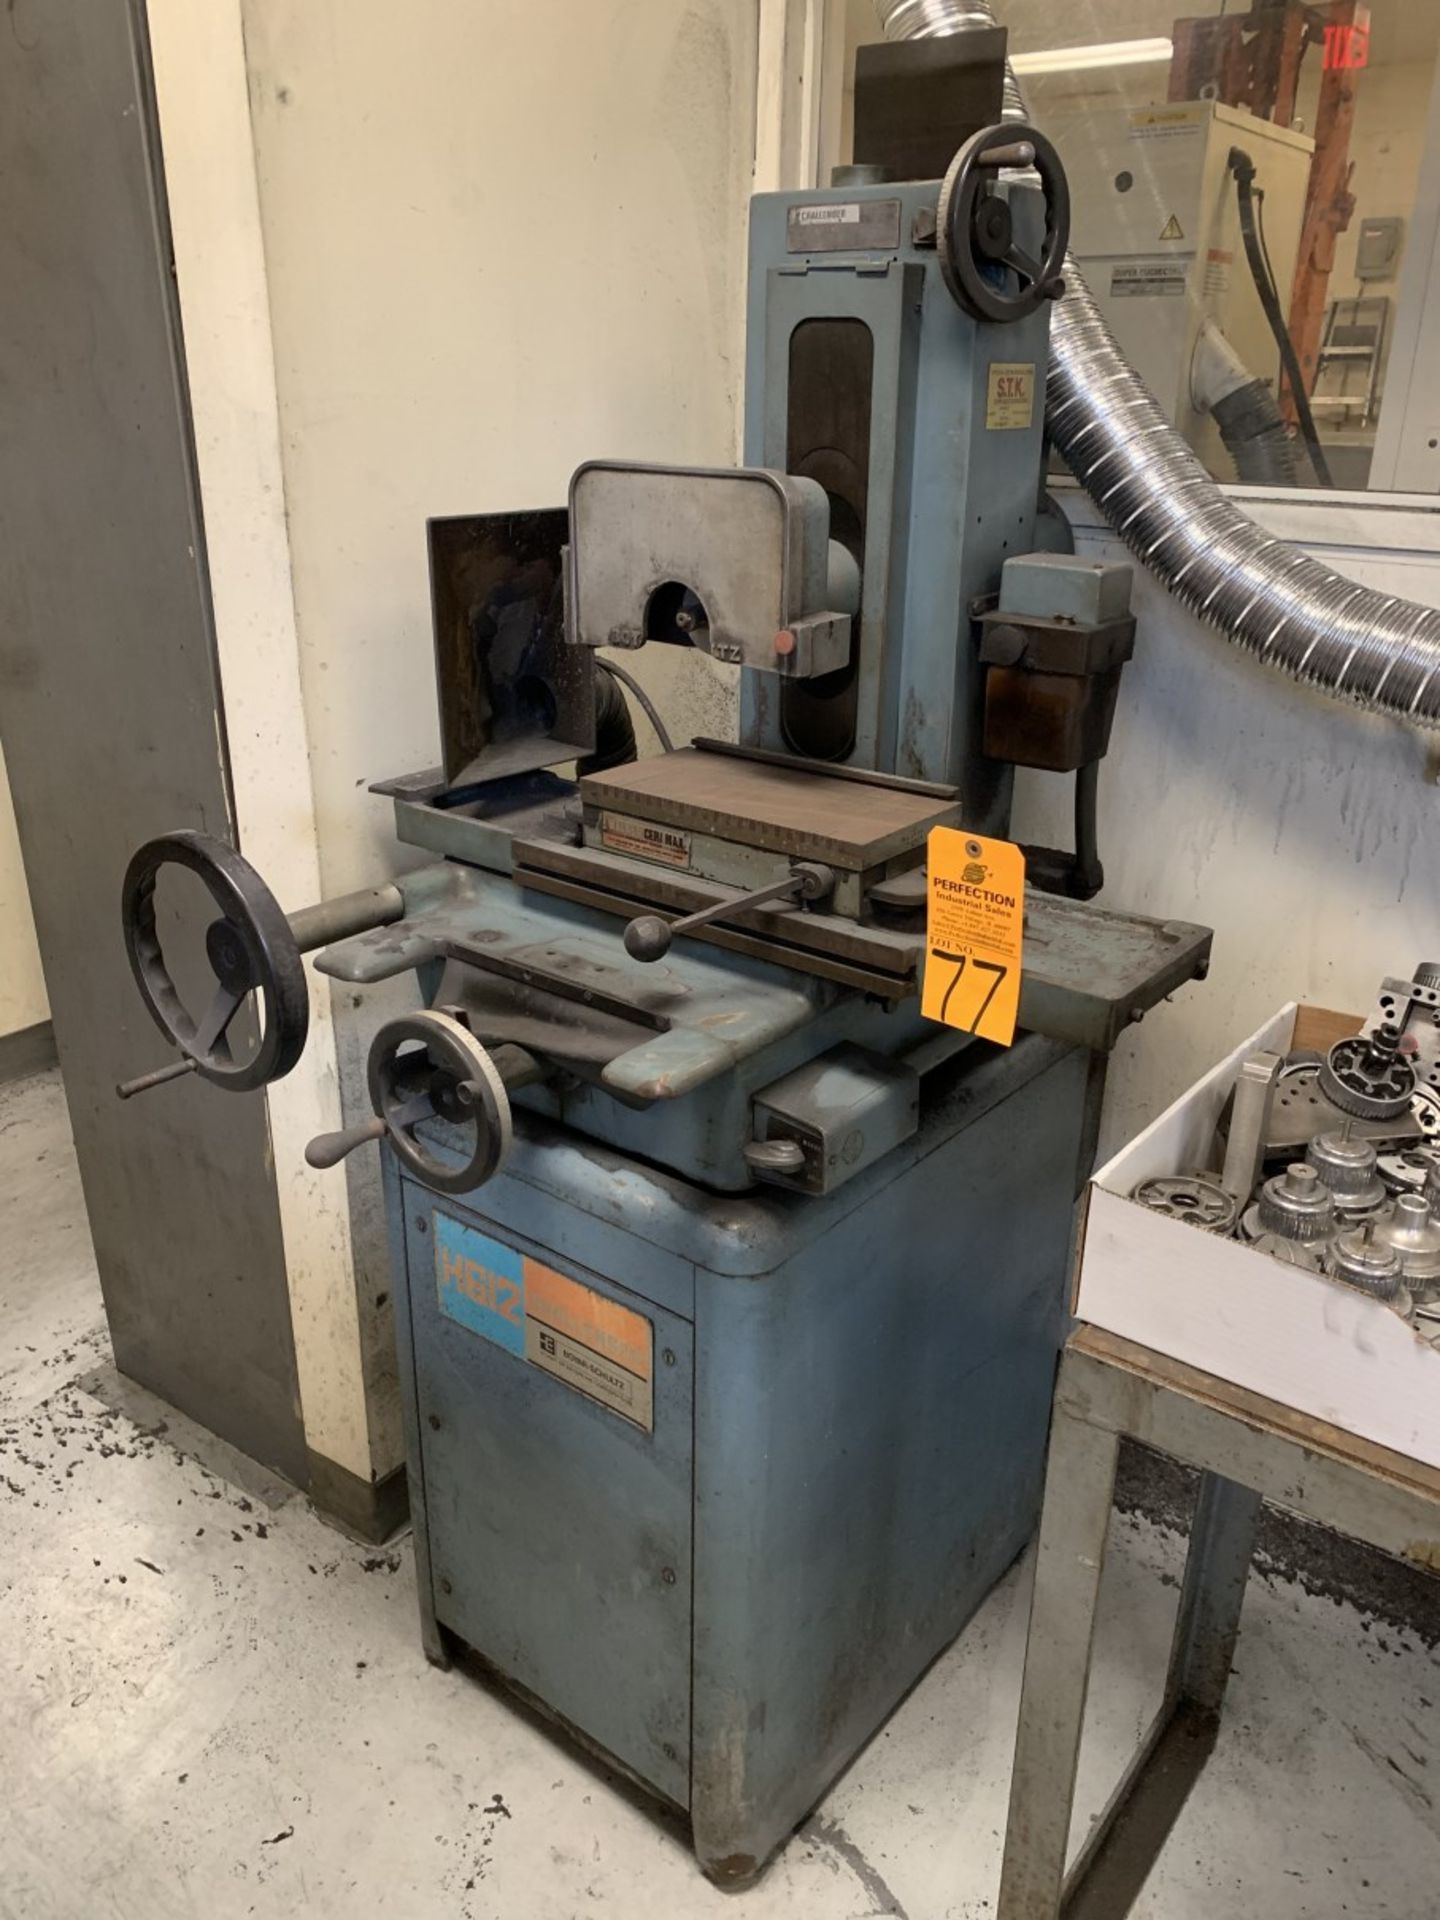 BOYAR-SCHULTZ H612 Surface Grinder, s/n 25156, 6" x 12" Magnetic Chuck (Located at: Goudie Tool &